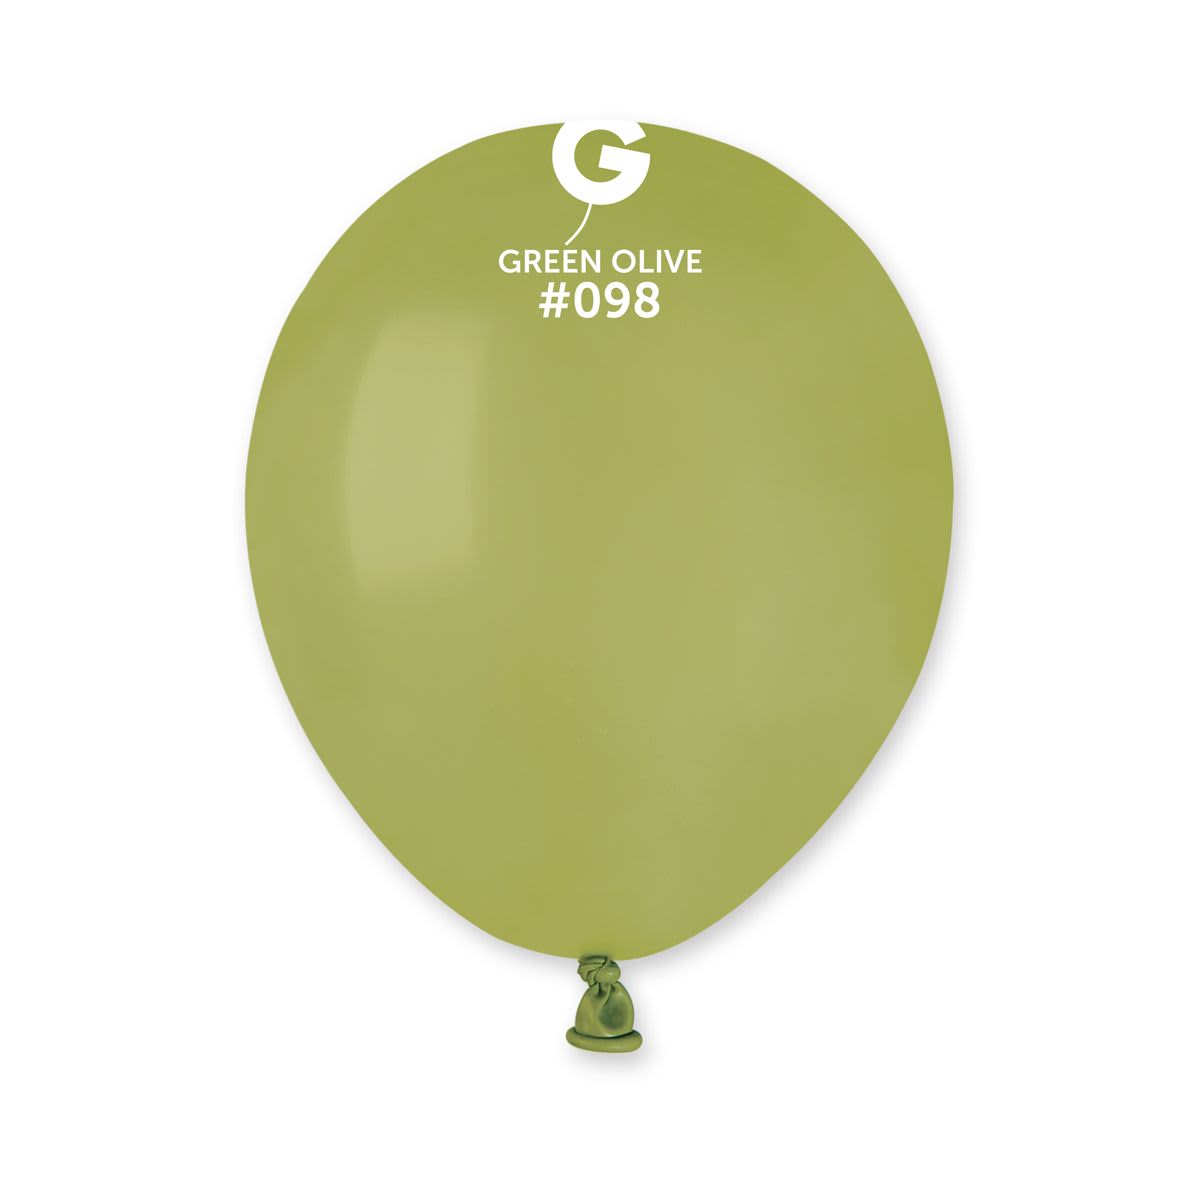 G-5” Green olive  #098 100ct